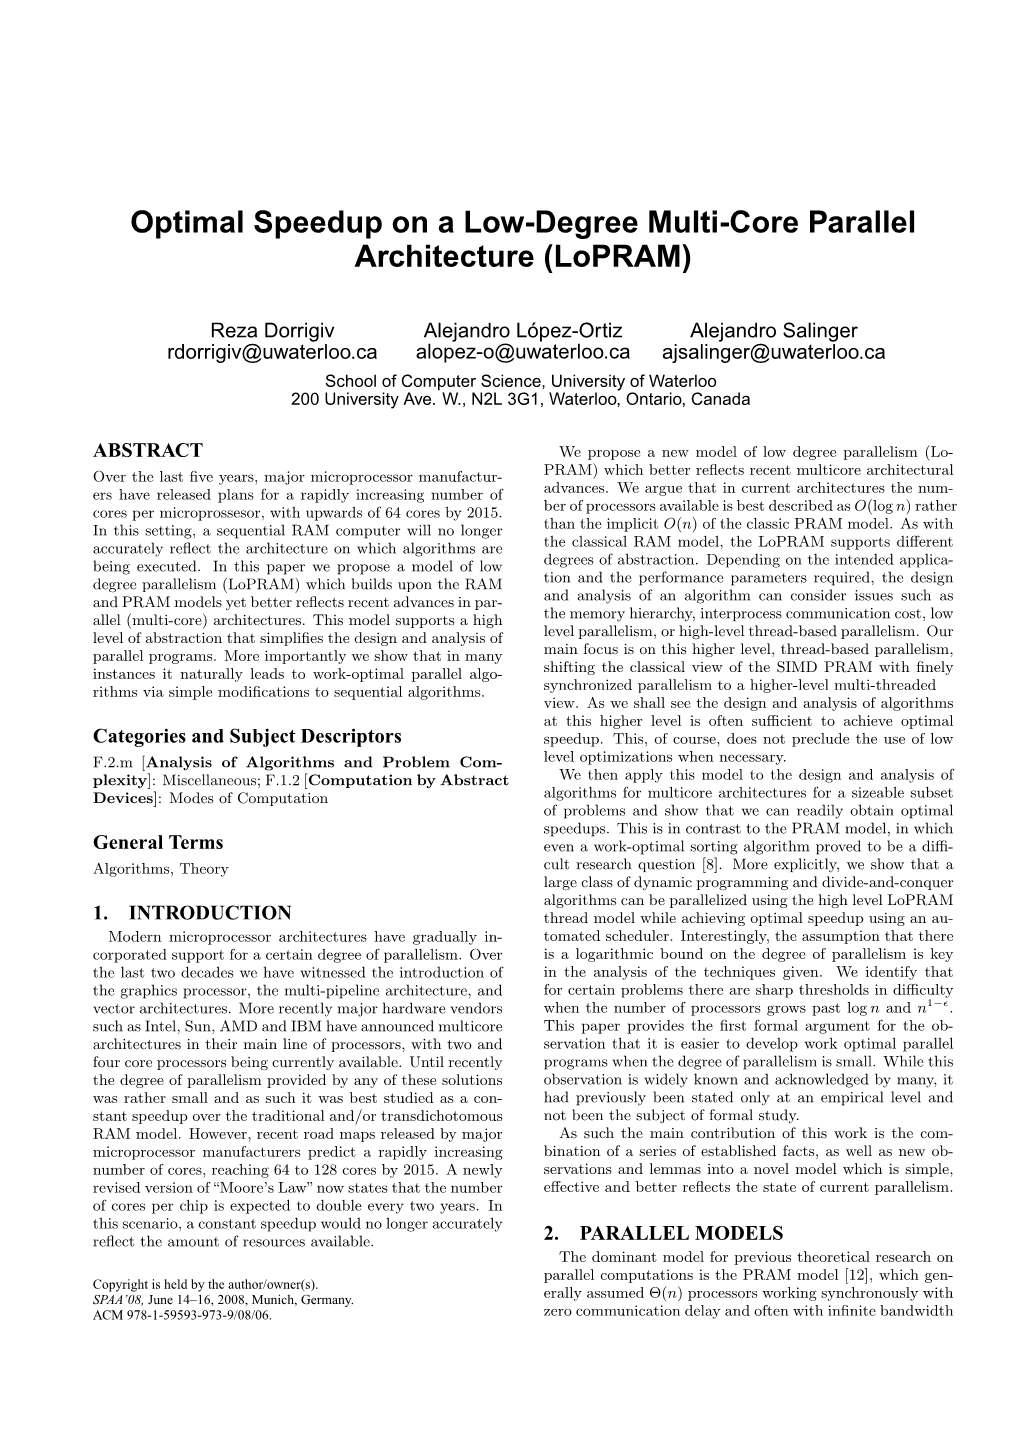 Optimal Speedup on a Low-Degree Multi-Core Parallel Architecture (Lopram)